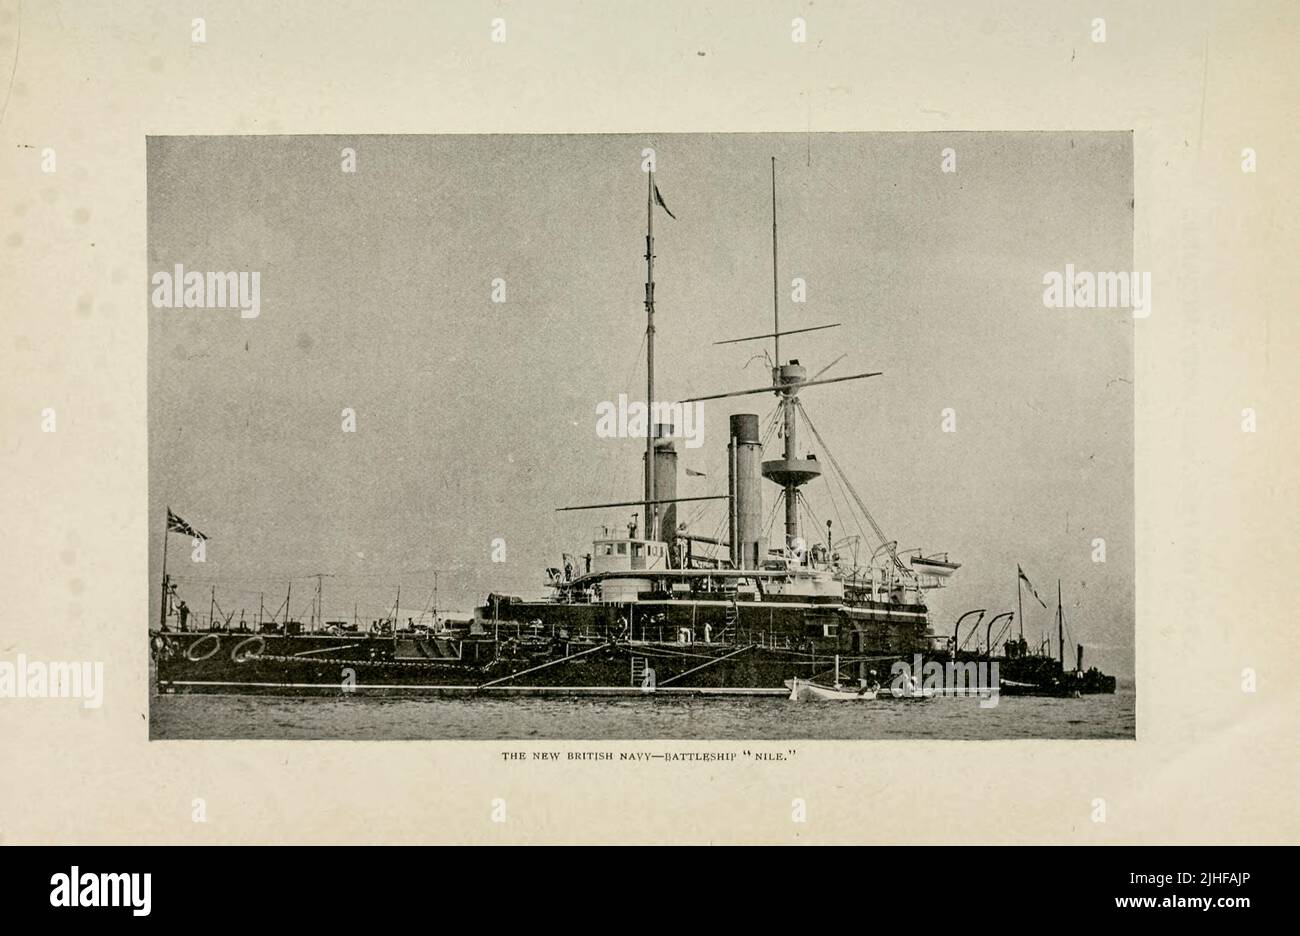 The New British Navy Battleship HMS Nile 1888 was one of two Trafalgar-class ironclad battleships built for the Royal Navy during the 1880s. Late deliveries of her main guns delayed her commissioning until 1891 and she spent most of the decade with the Mediterranean Fleet. Nile returned home in 1898 and became the coast guard ship at Devonport for five years before she was placed in reserve in 1903. The ship was sold for scrap in 1912 and broken up at Swansea, Wales. from an article ' SHIPS OF THE NEW BRITISH NAVY ' by W. Laird Clotvcs from Factory and industrial management Magazine Volume 6 1 Stock Photo